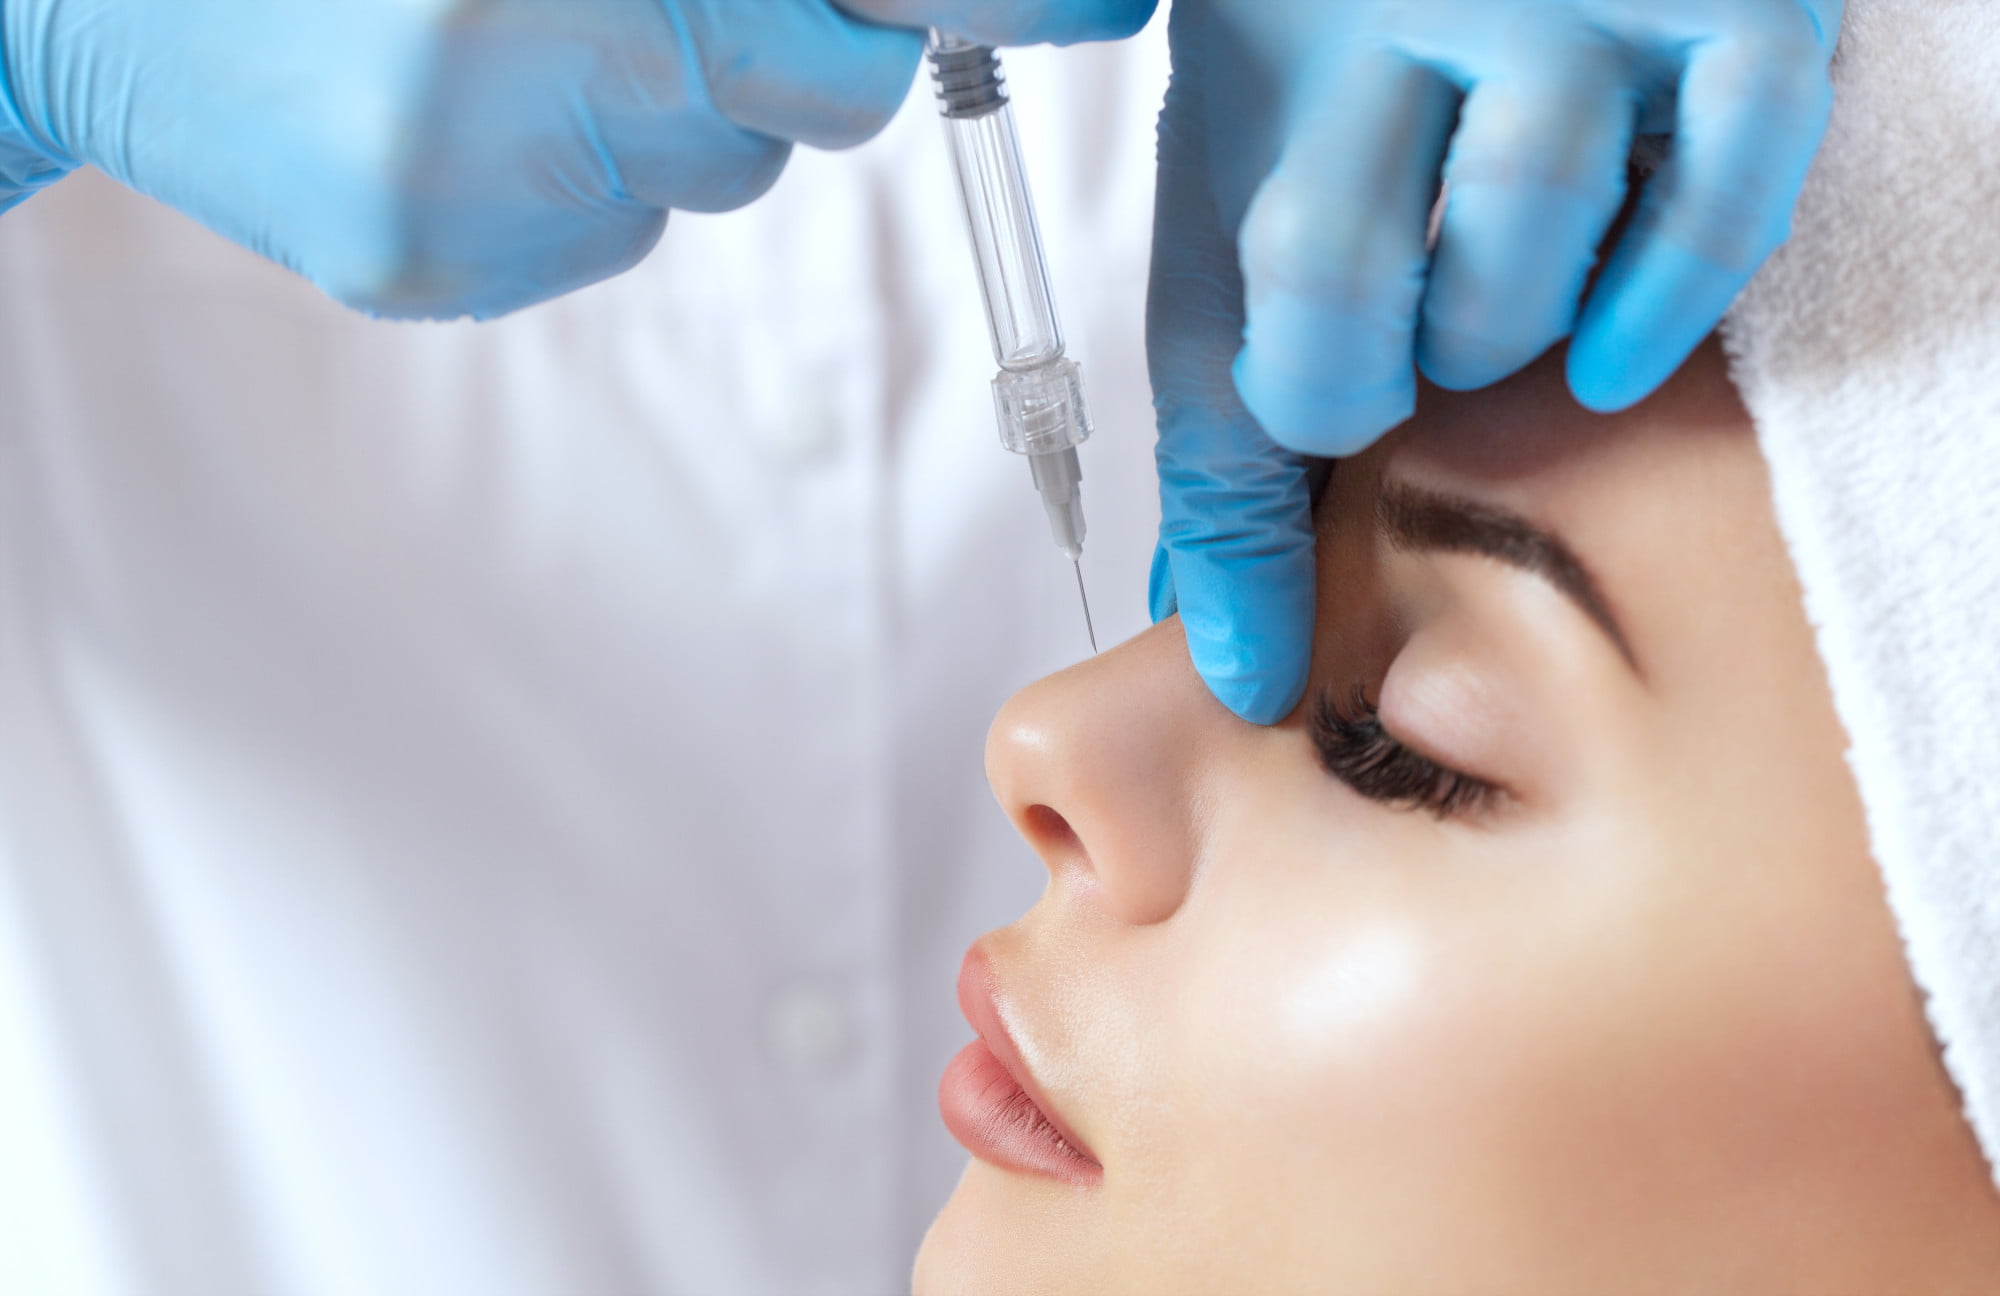 Are you interested in having a rhinoplasty done? Click here for a guide to the different types of nose jobs to explore your options.